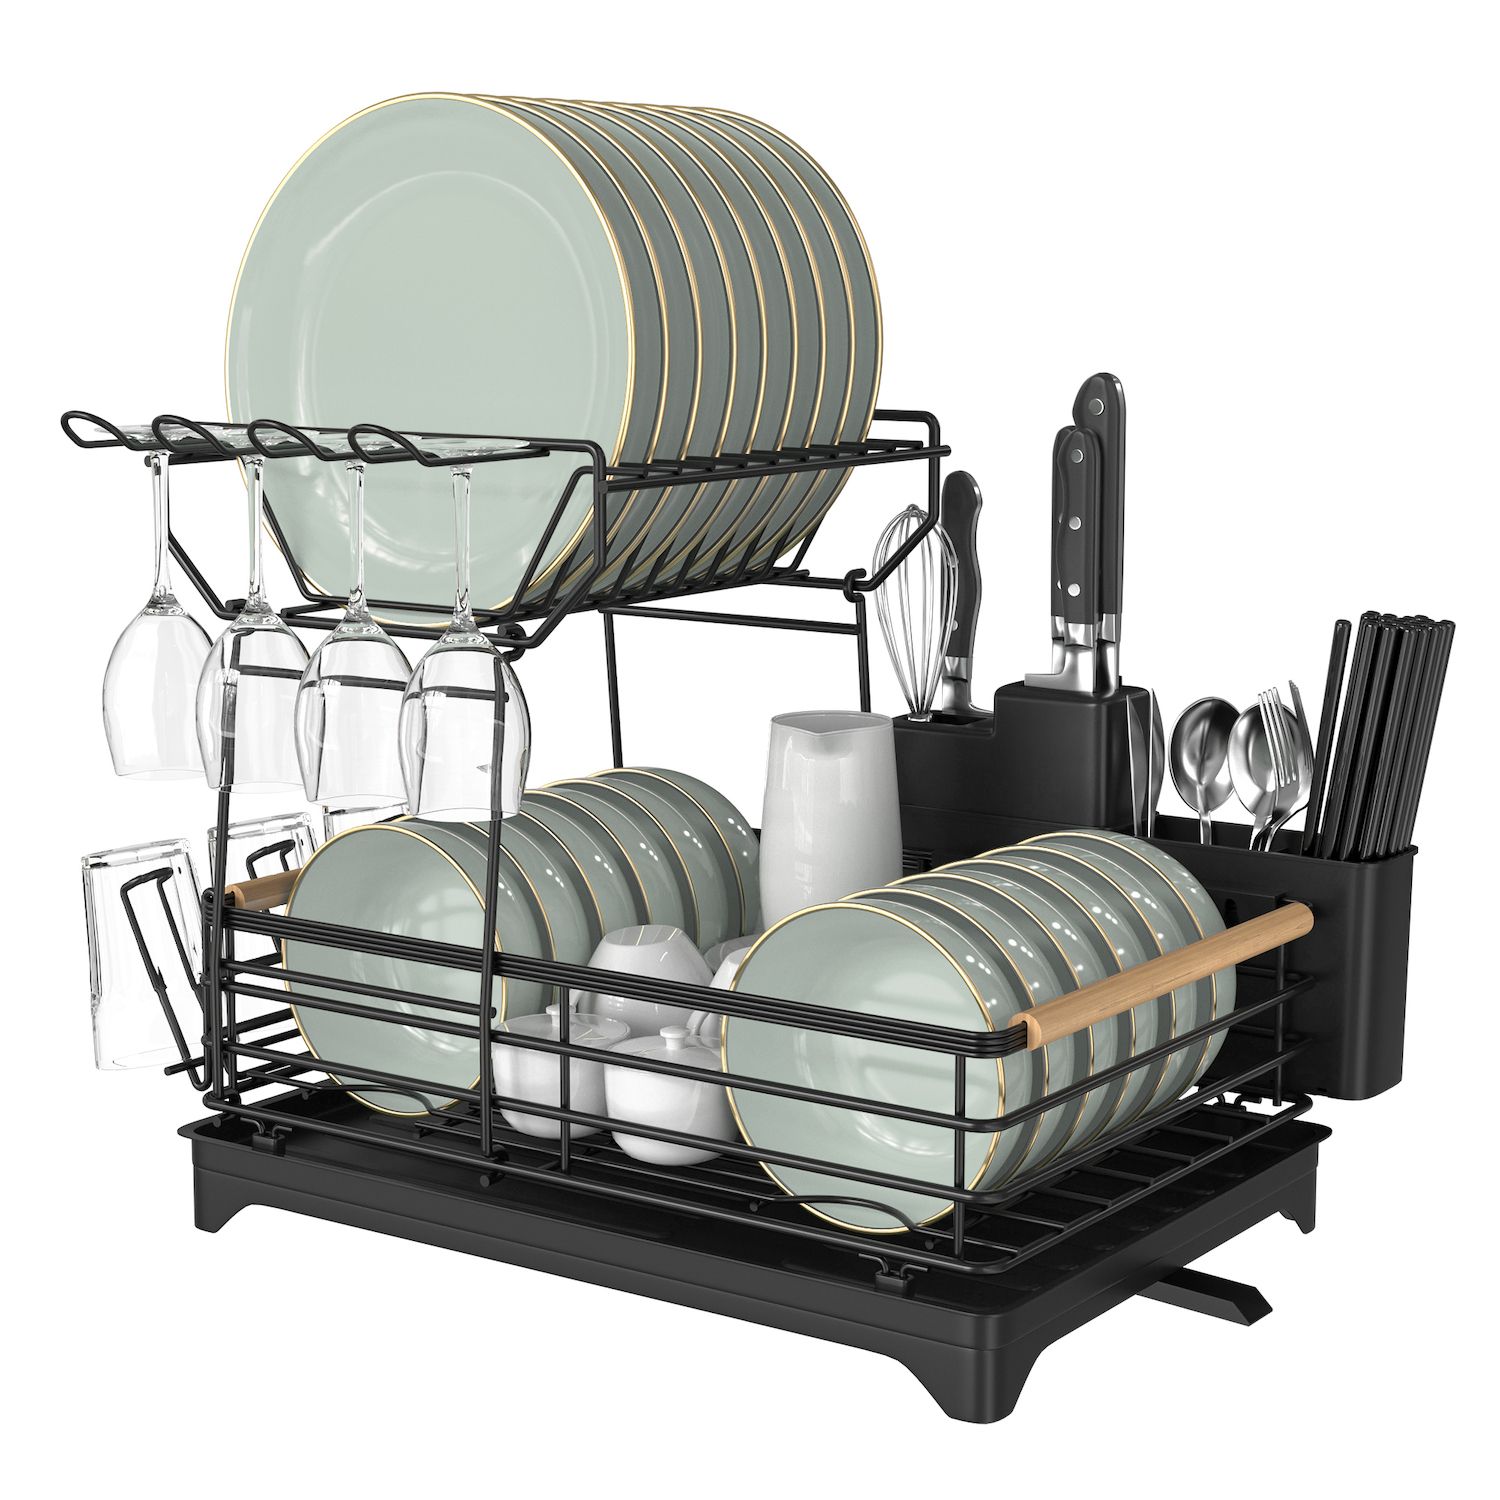 Zulay Kitchen Foldable Bamboo Dish Drying Rack - 2-Tier, 1